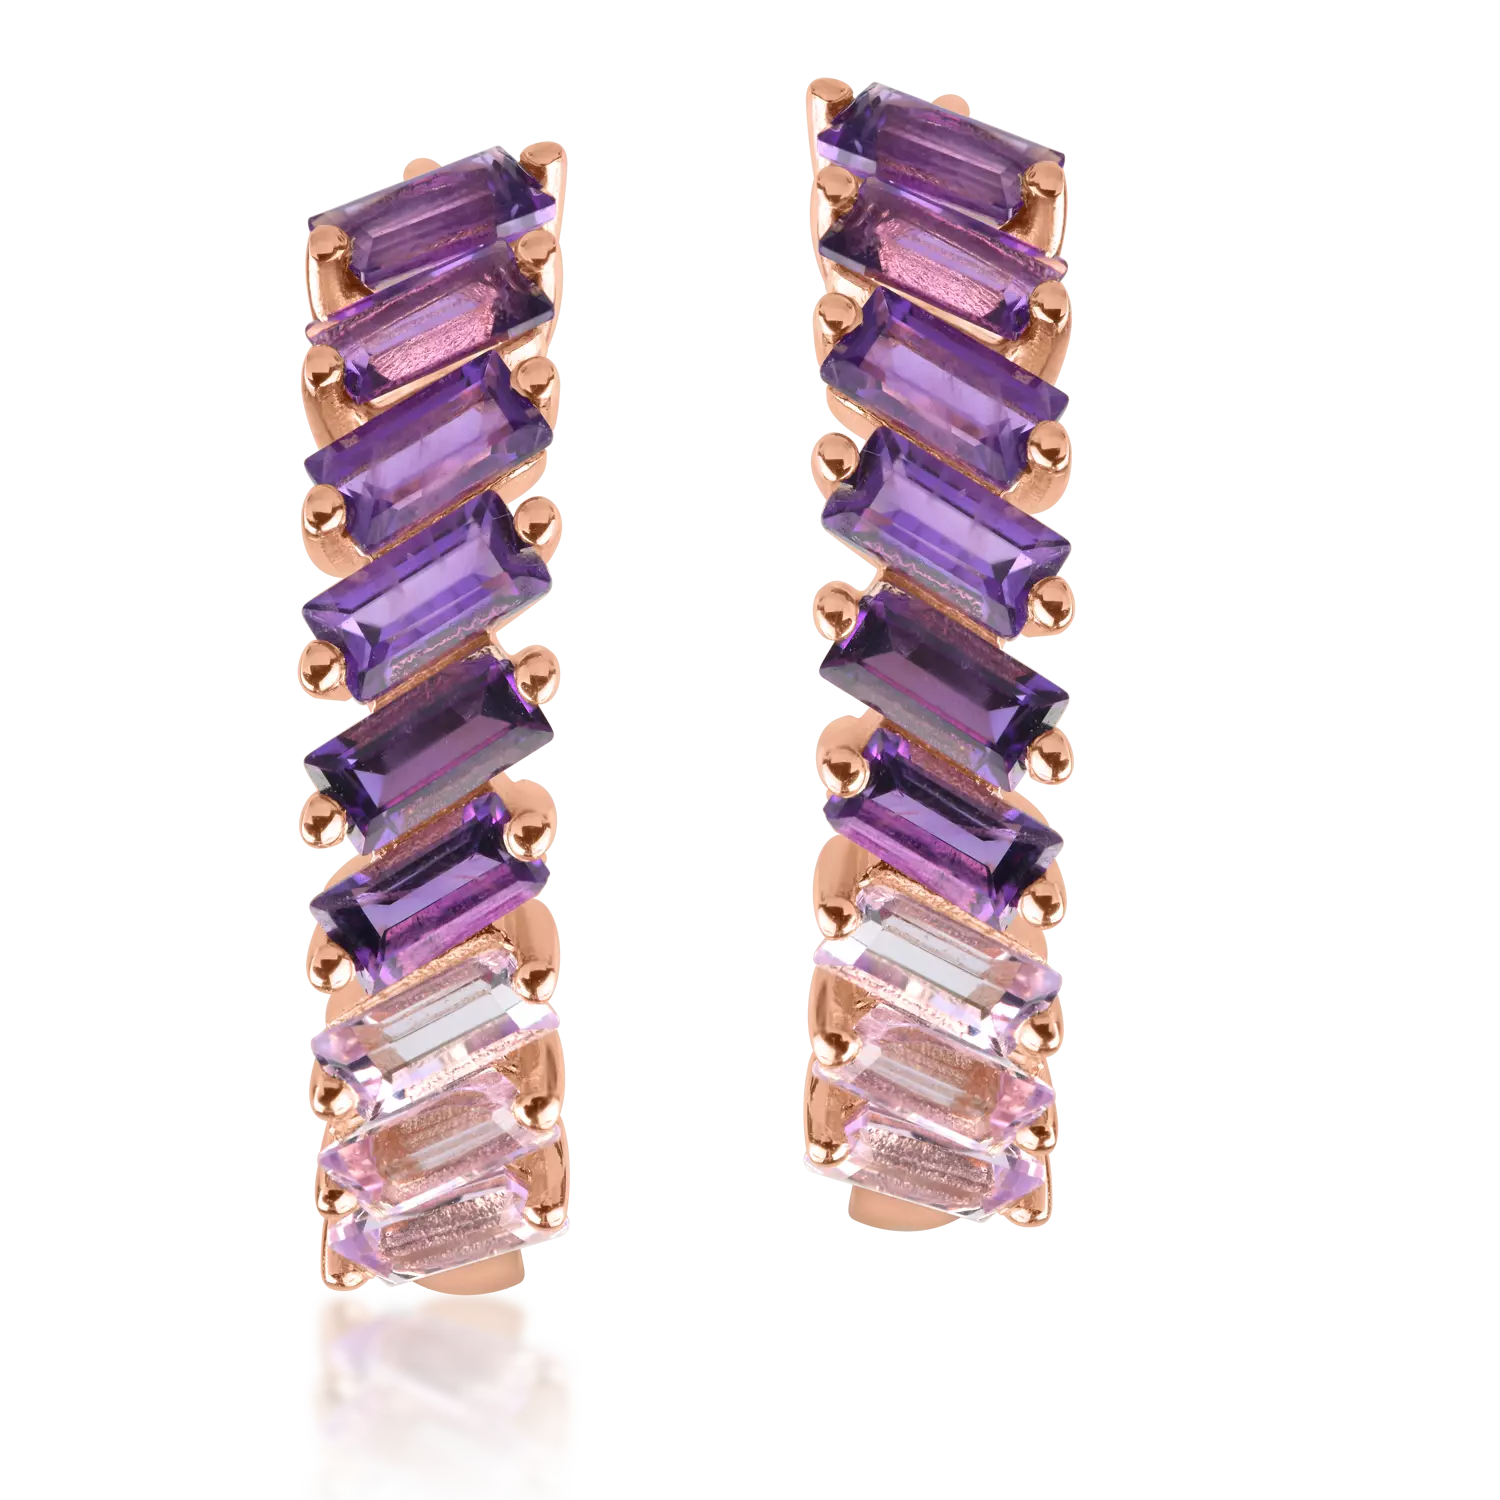 Rose gold earrings with 1.7ct amethysts